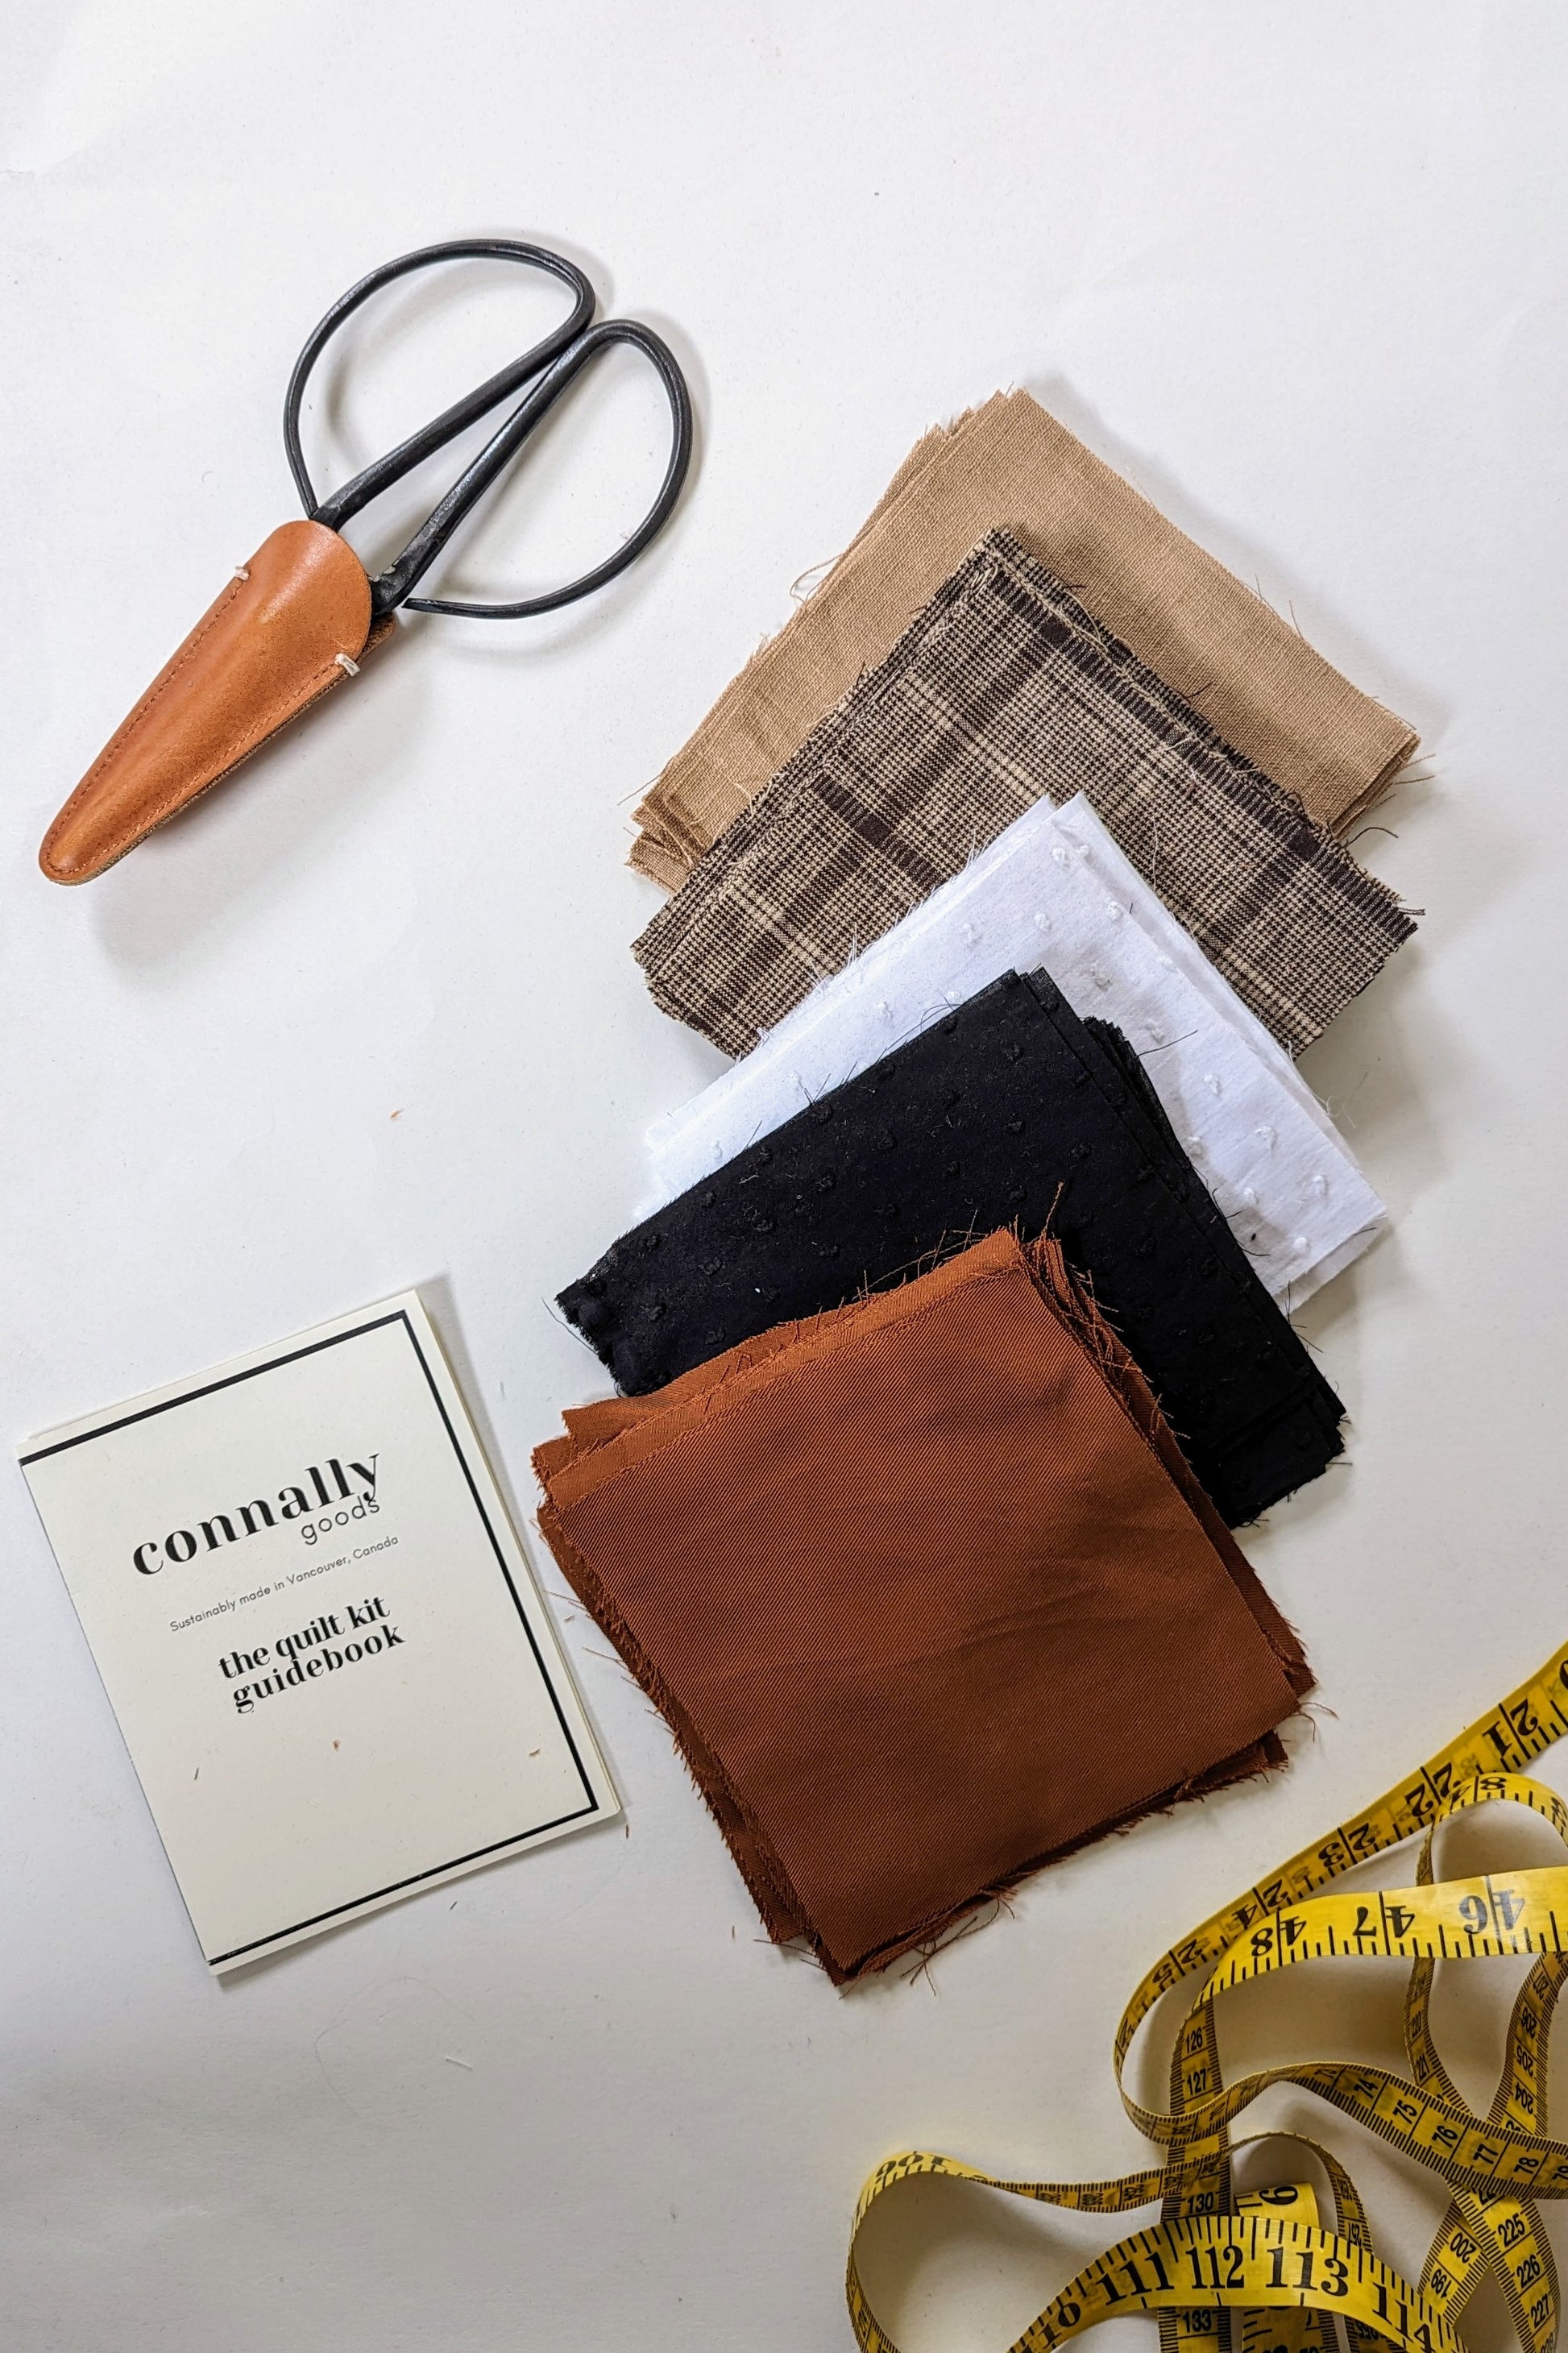 Quilt Kit by Connally Goods